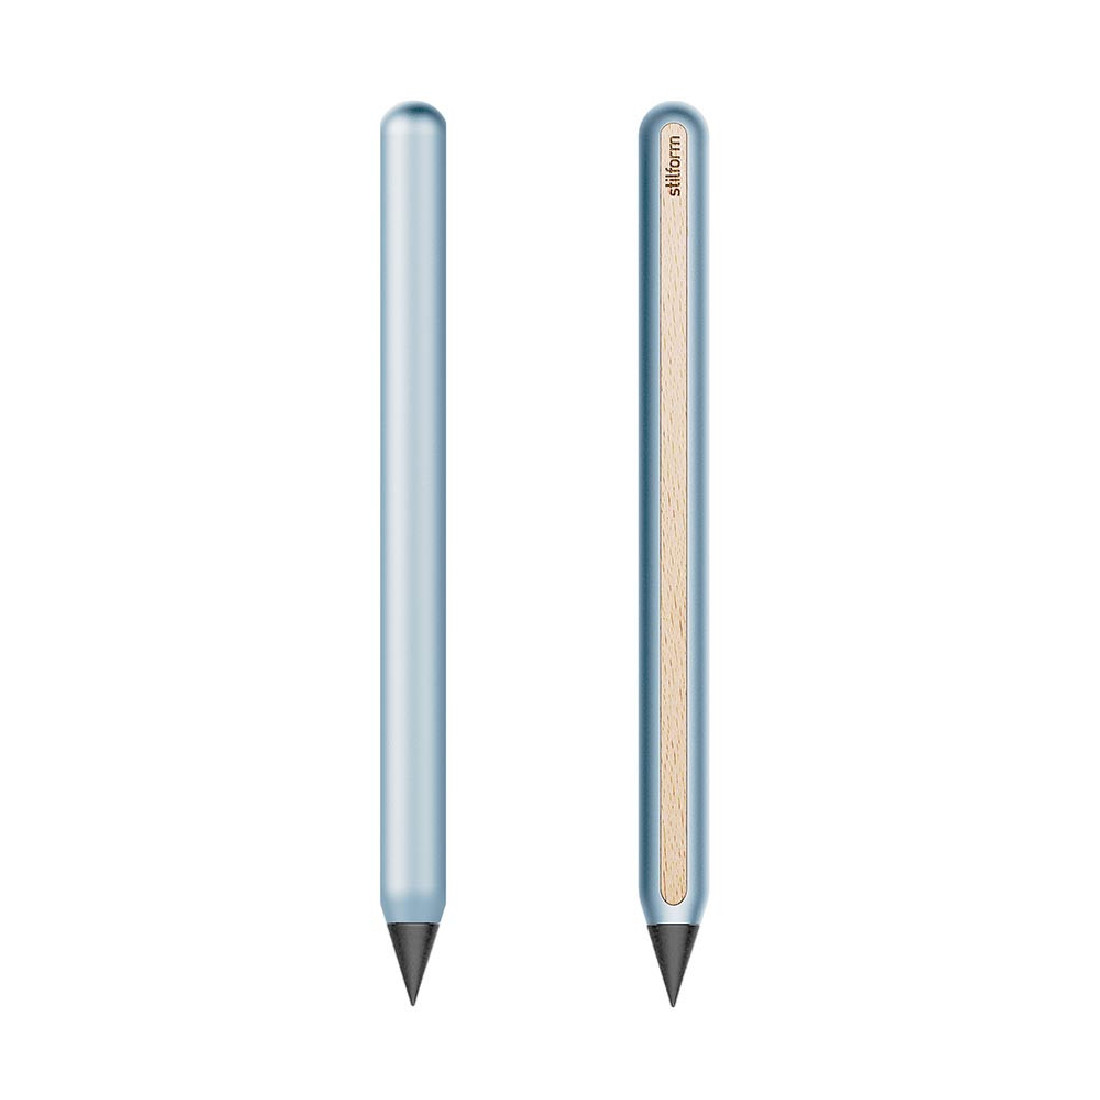 Stilform Aluminium AEON Pencil Heavenslight Blue, limited edition, with only 300 pieces wordwide